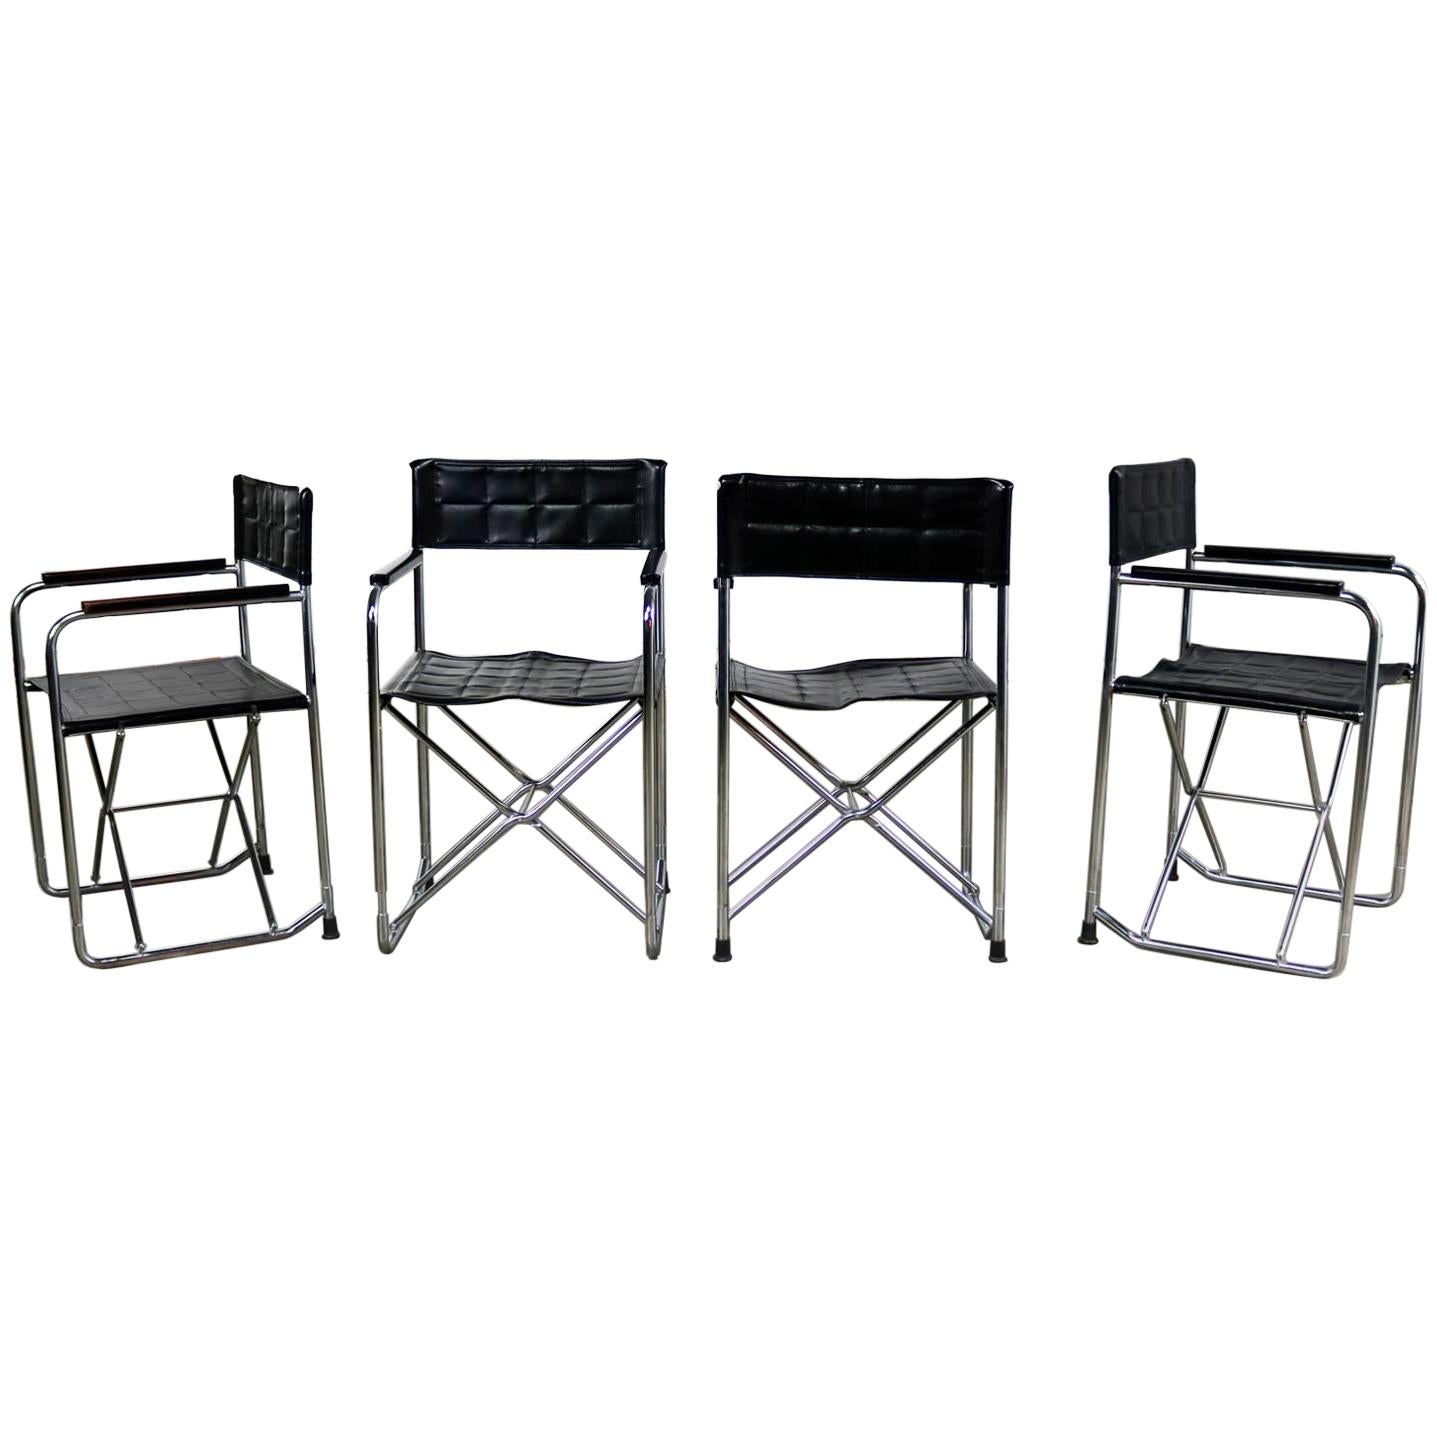 Folding Campaign Style Director’s Chairs Black Vinyl & Chrome Style Gae Aulenti